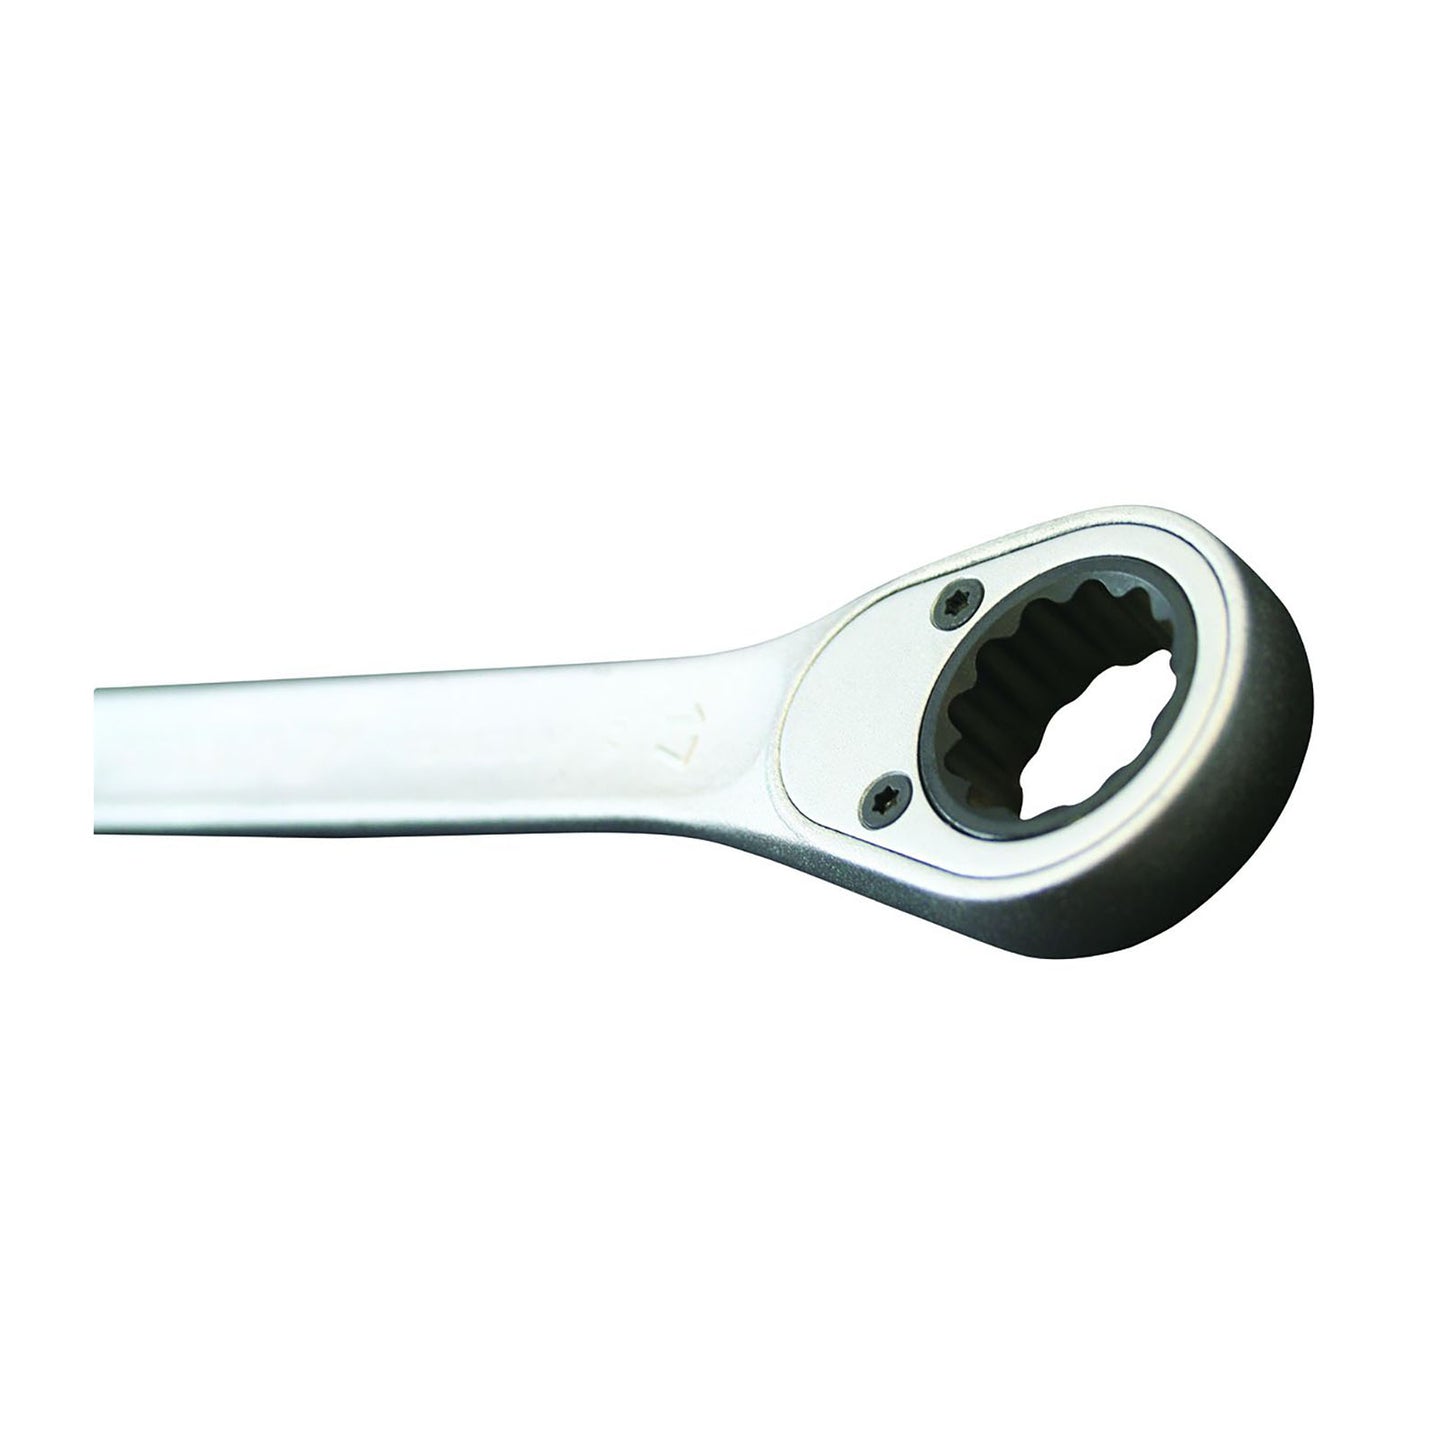 GEDORE 7 R 19 - Ratchet combination wrench, 19mm (2297175)